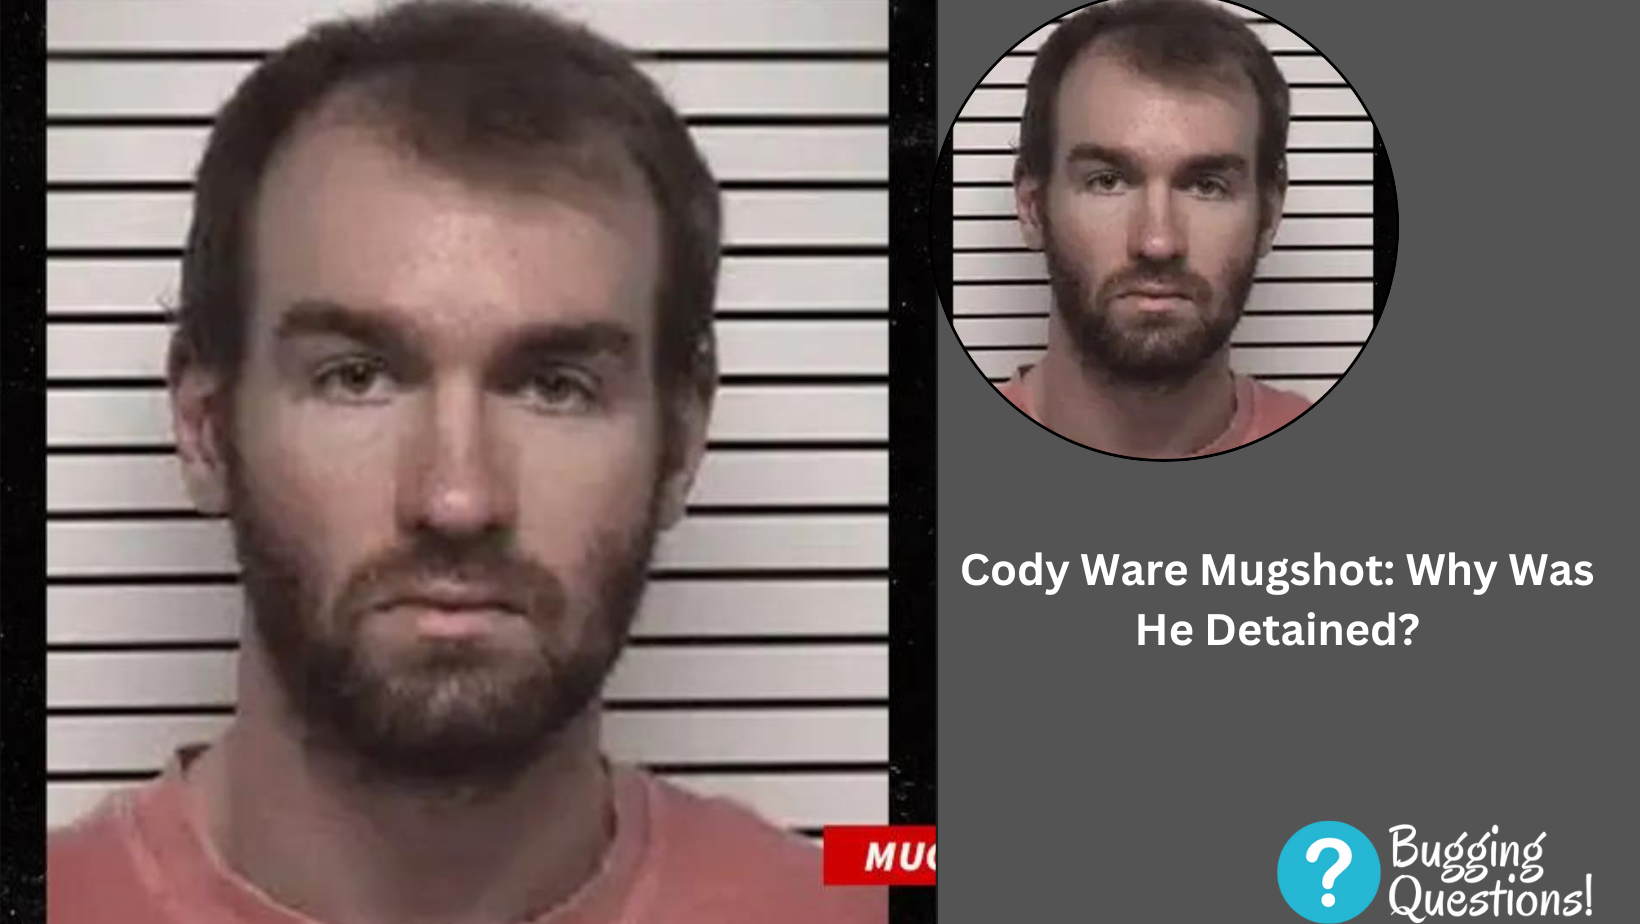 Cody Ware Mugshot: Why Was He Detained?